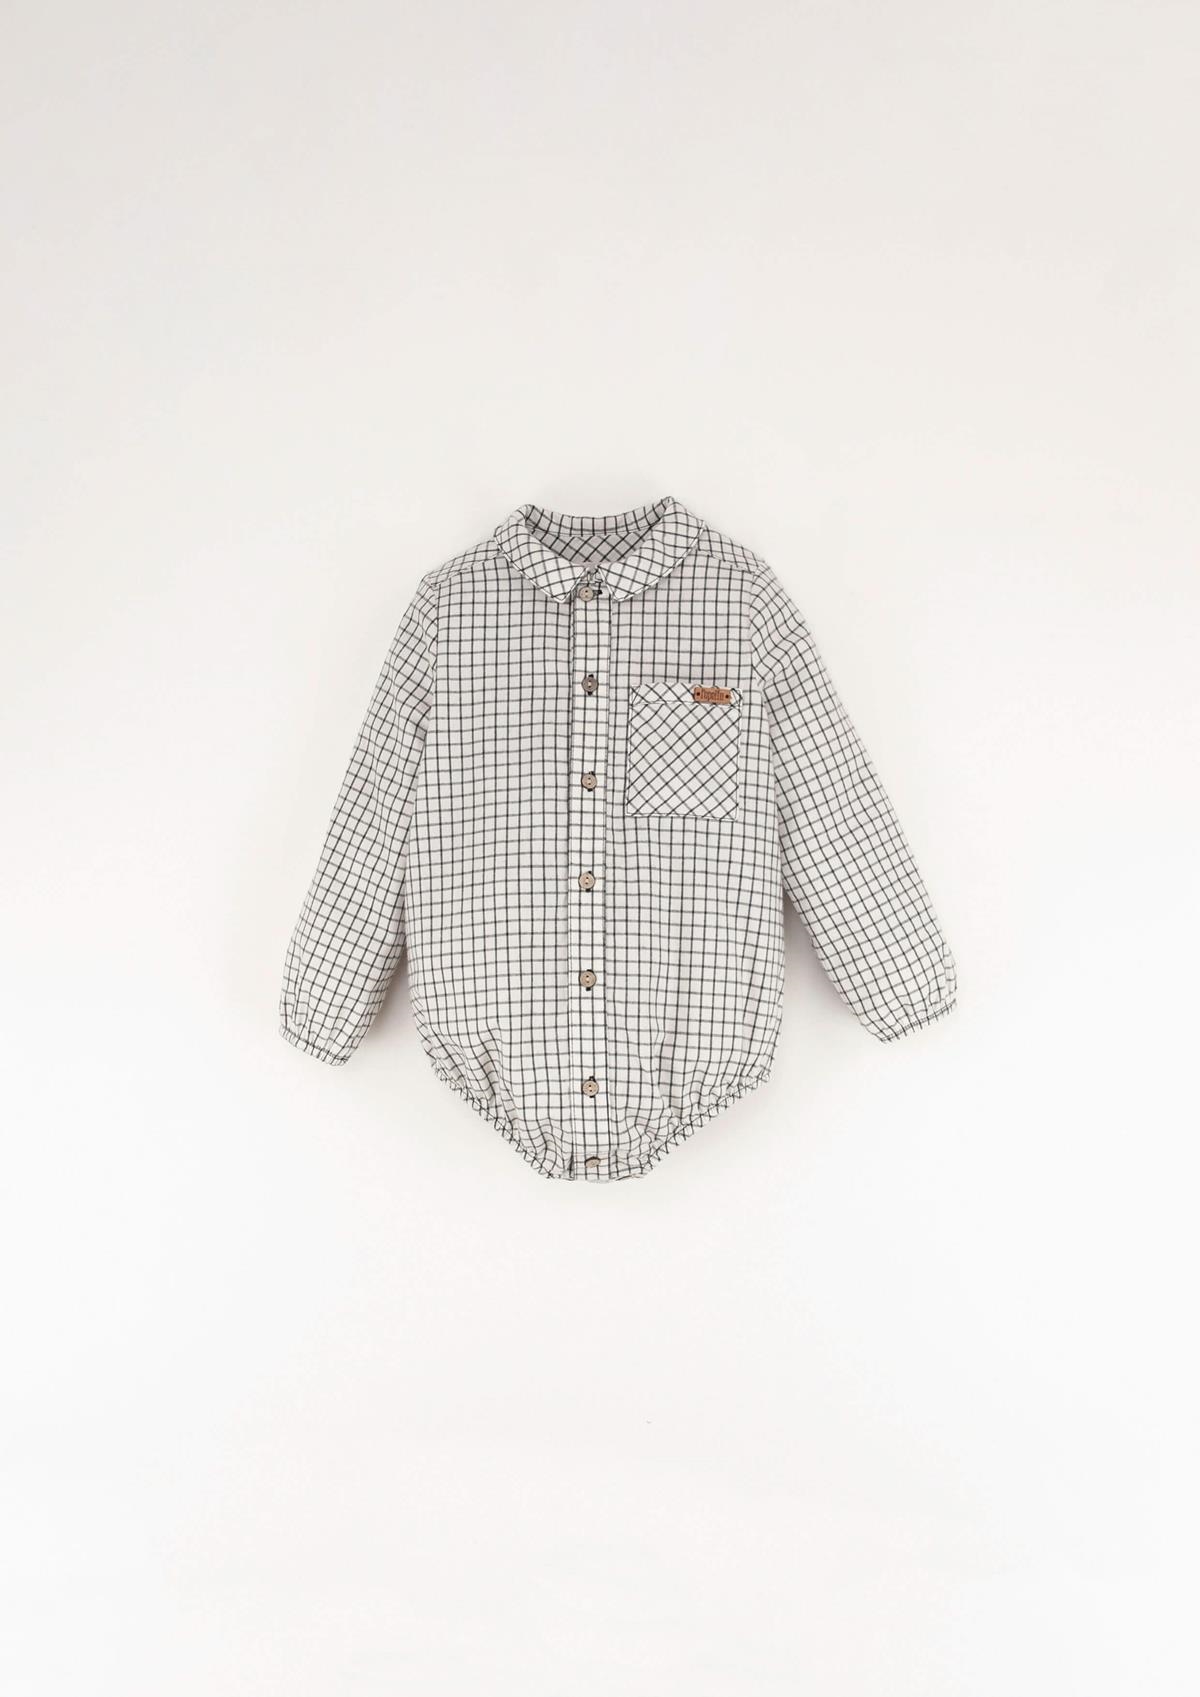 Mod.6.2 Off-white check shirt romper suit | AW23.24 Mod.6.2 Off-white check shirt romper suit